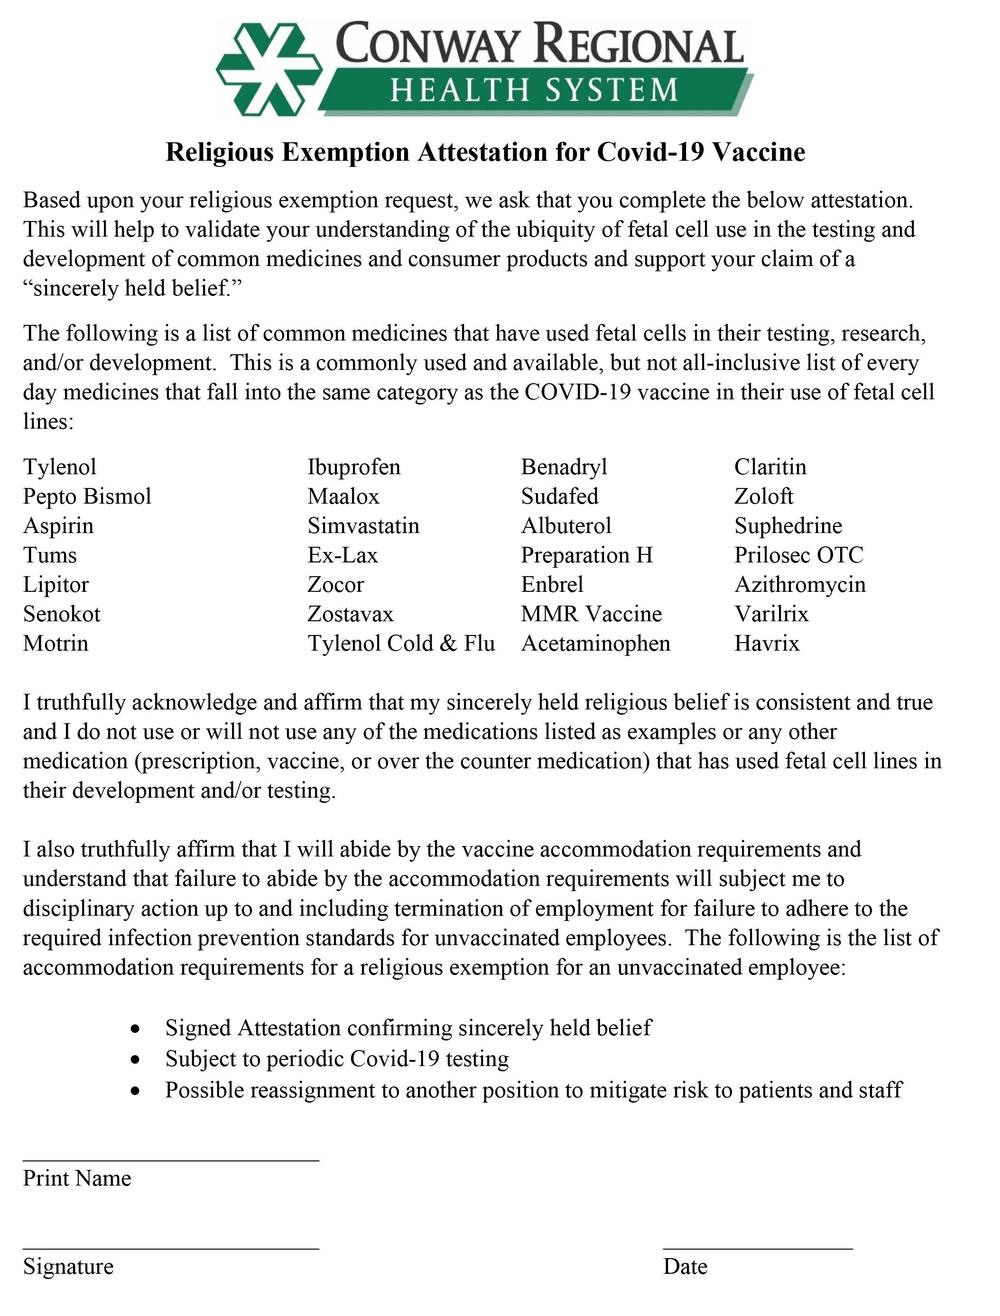 As part of an education campaign, Conway Regional Health System sent this form out to employees who requested religious exemptions to the hospital's COVID-19 vaccine mandate.